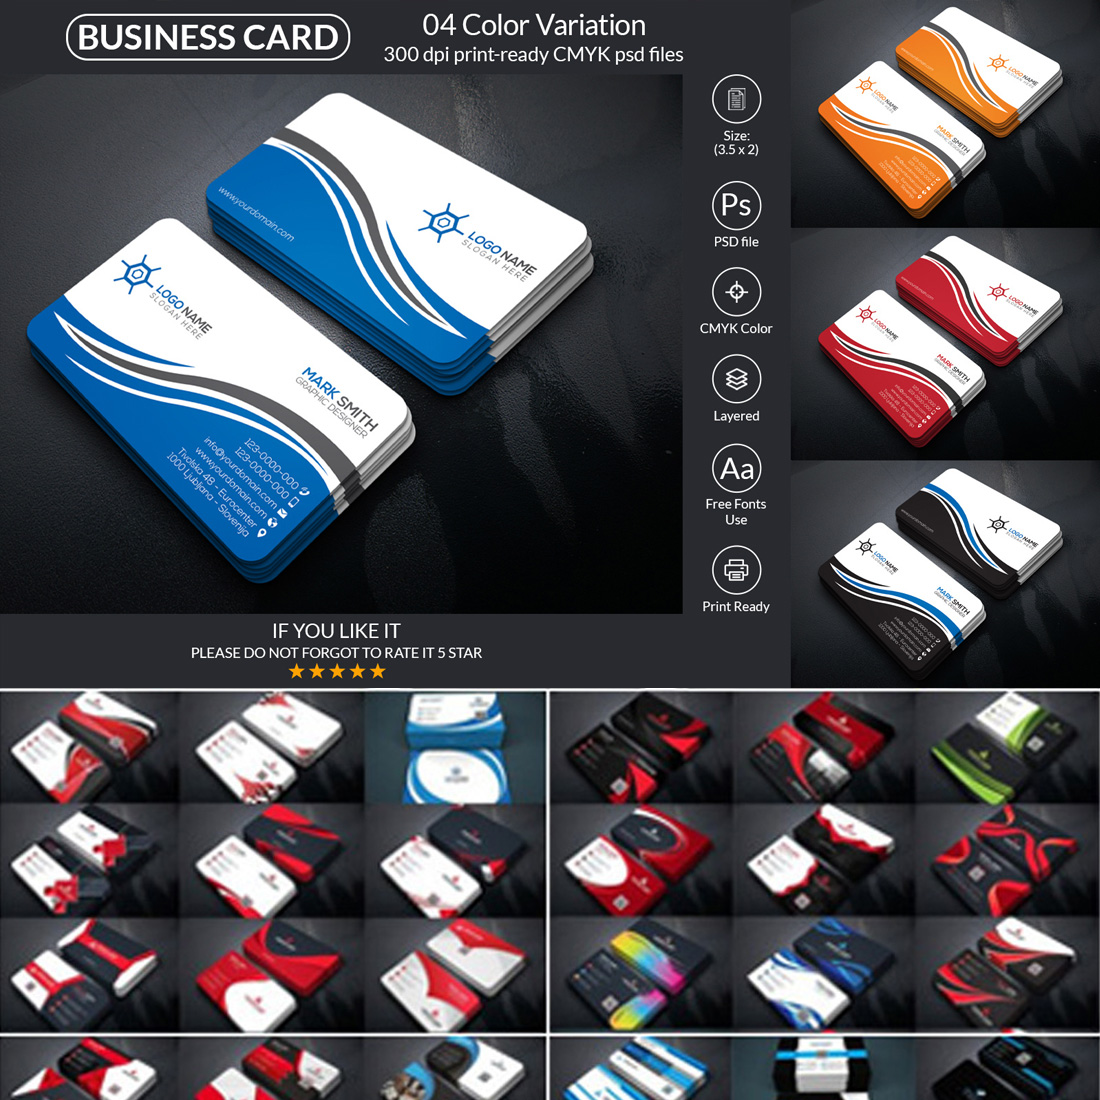 500+ Business Card Design PSD Templates preview image.